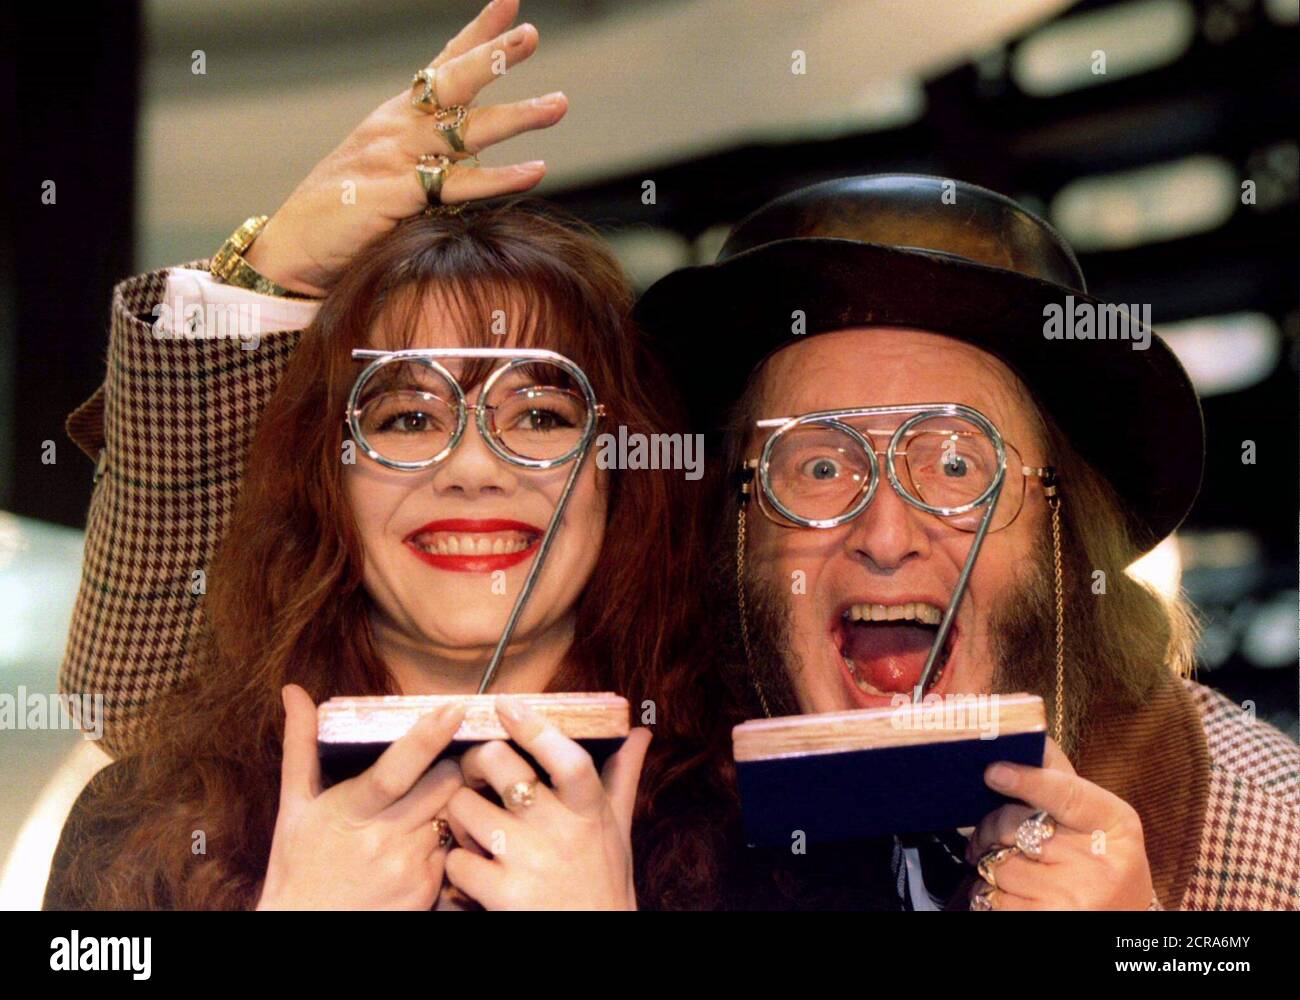 Comedienne Josie Lawrence and horse-racing expert John McCririck show off their Spectacle Wearer of the Year Awards following a ceremony in central London March 25. The awards coincided with the opening of an exhibition designed to aid the charity Vision Aid Overseas.  SPECTACLES Stock Photo